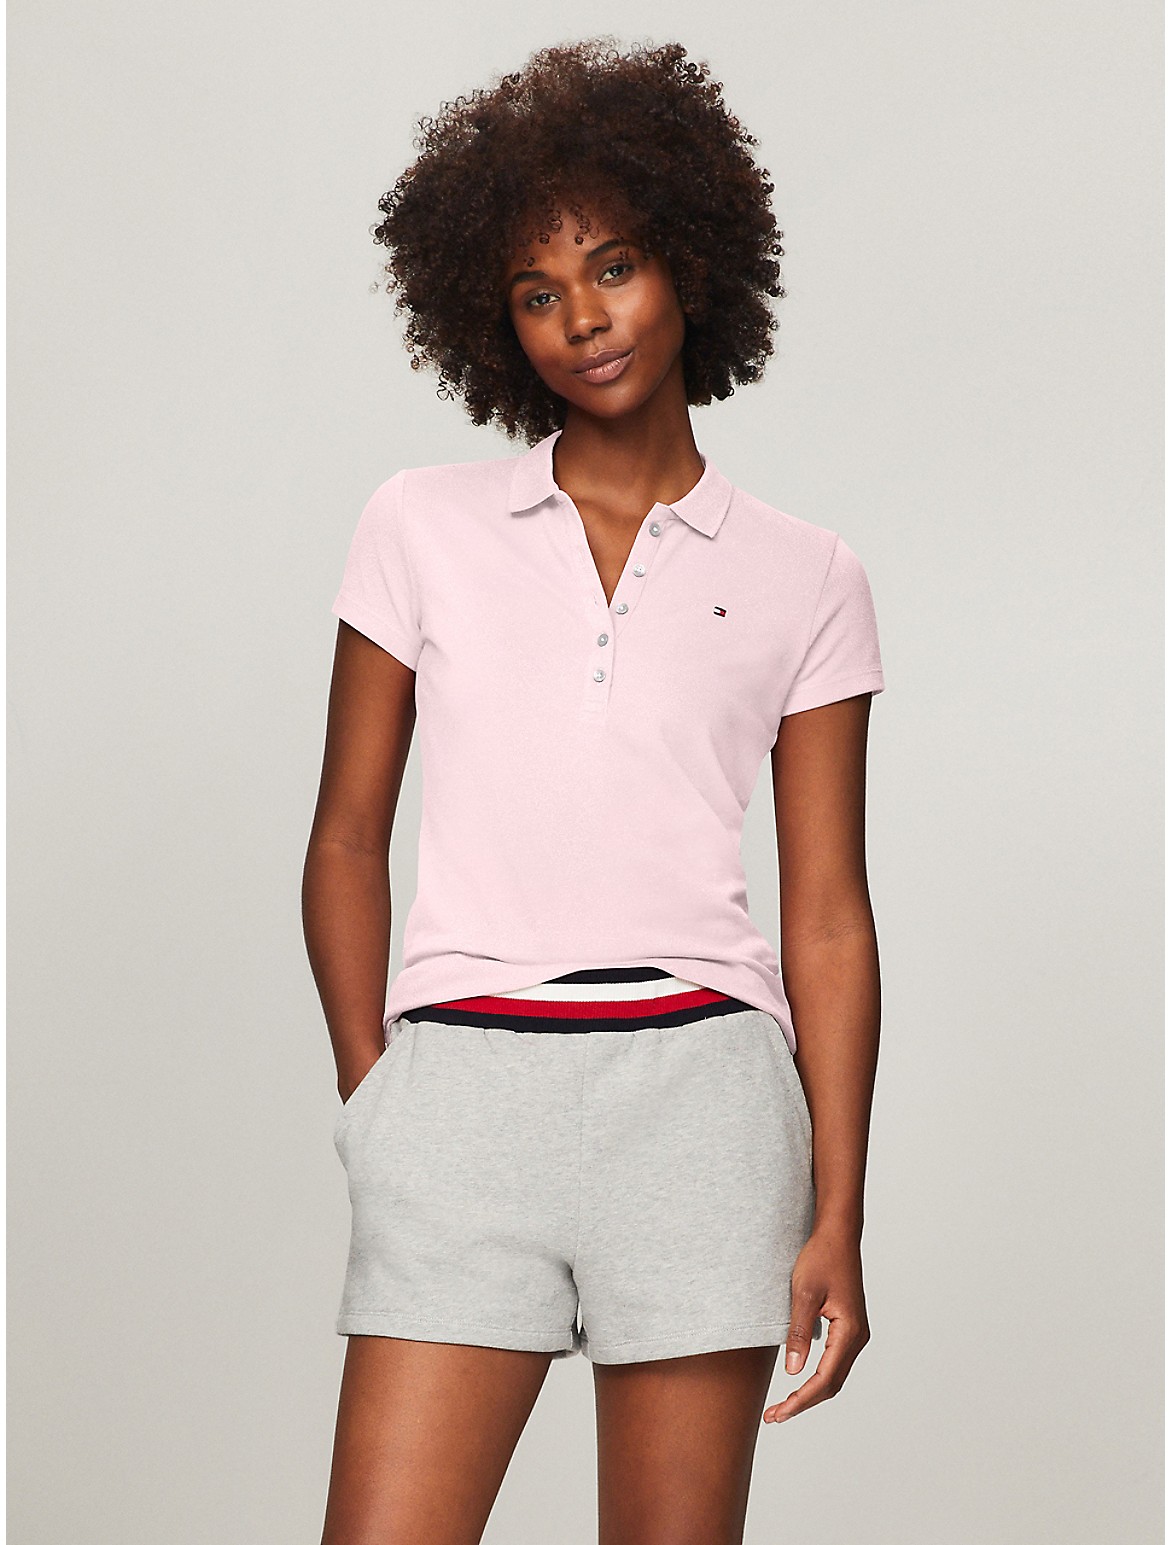 Tommy Hilfiger Women's Slim Fit Stretch Cotton Polo - Pink - M